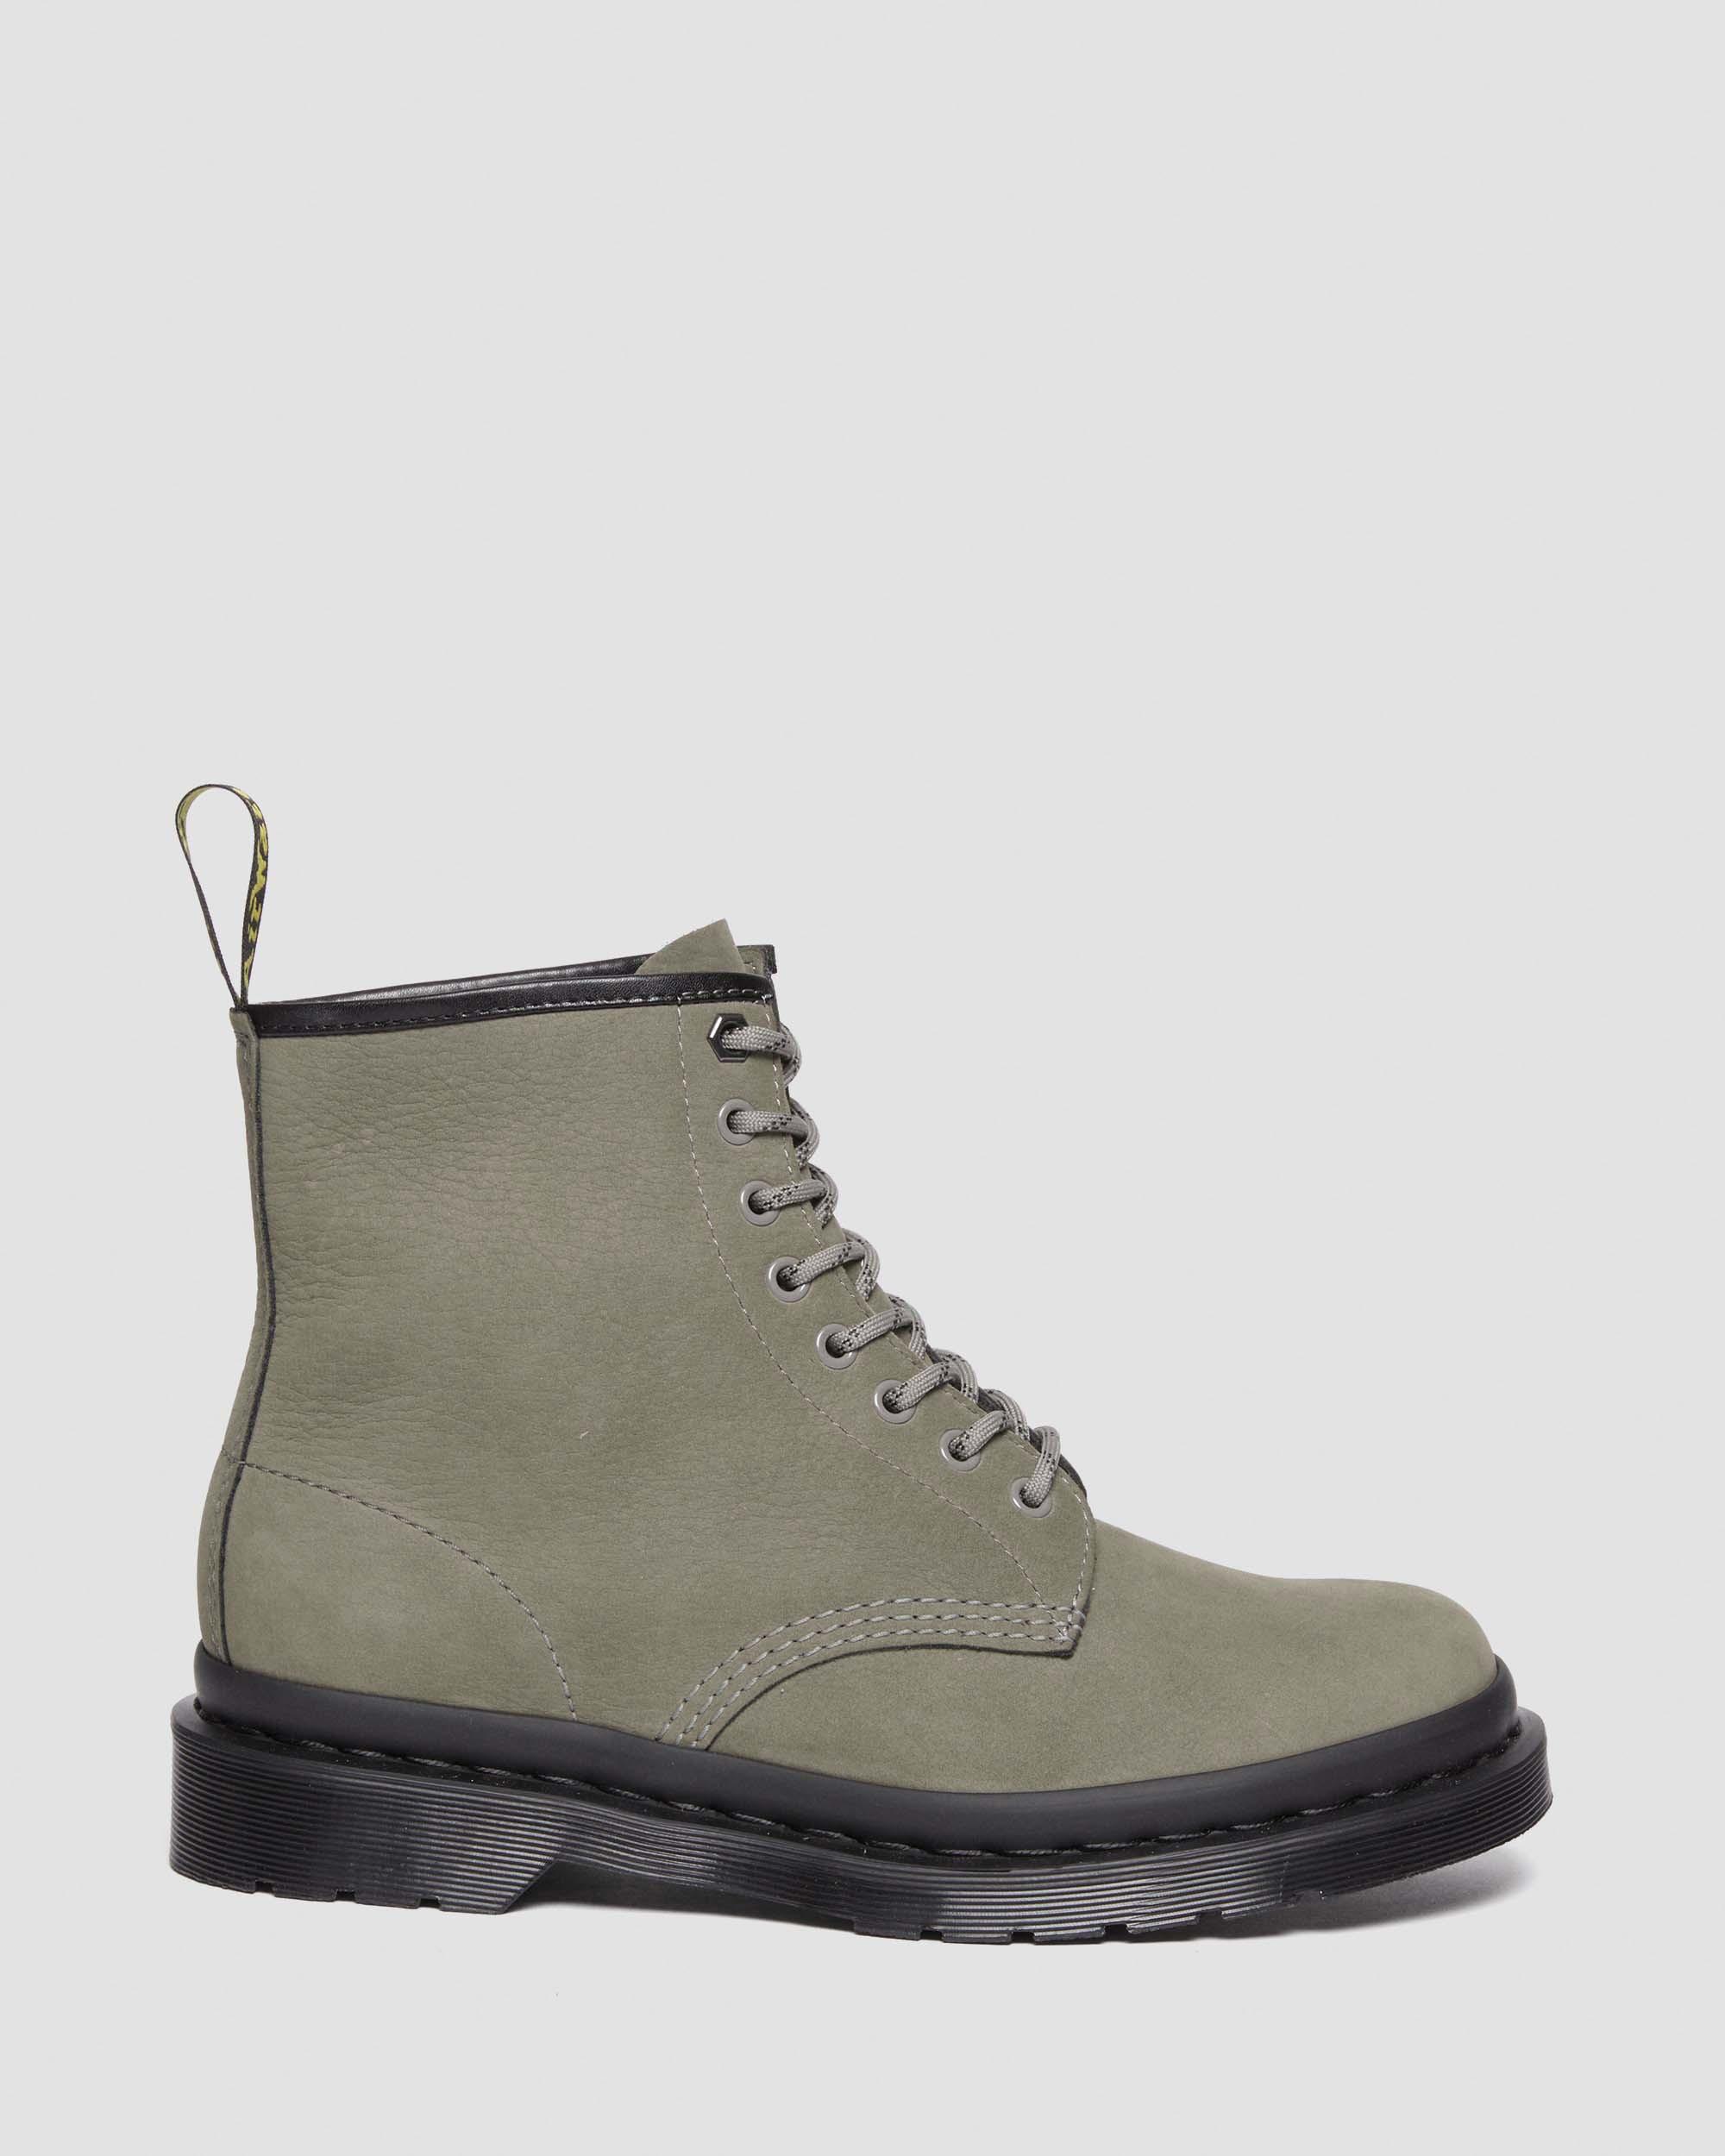 1460 Mono Milled Nubuck Lace Up Boots, Nickel Grey | Dr. Martens